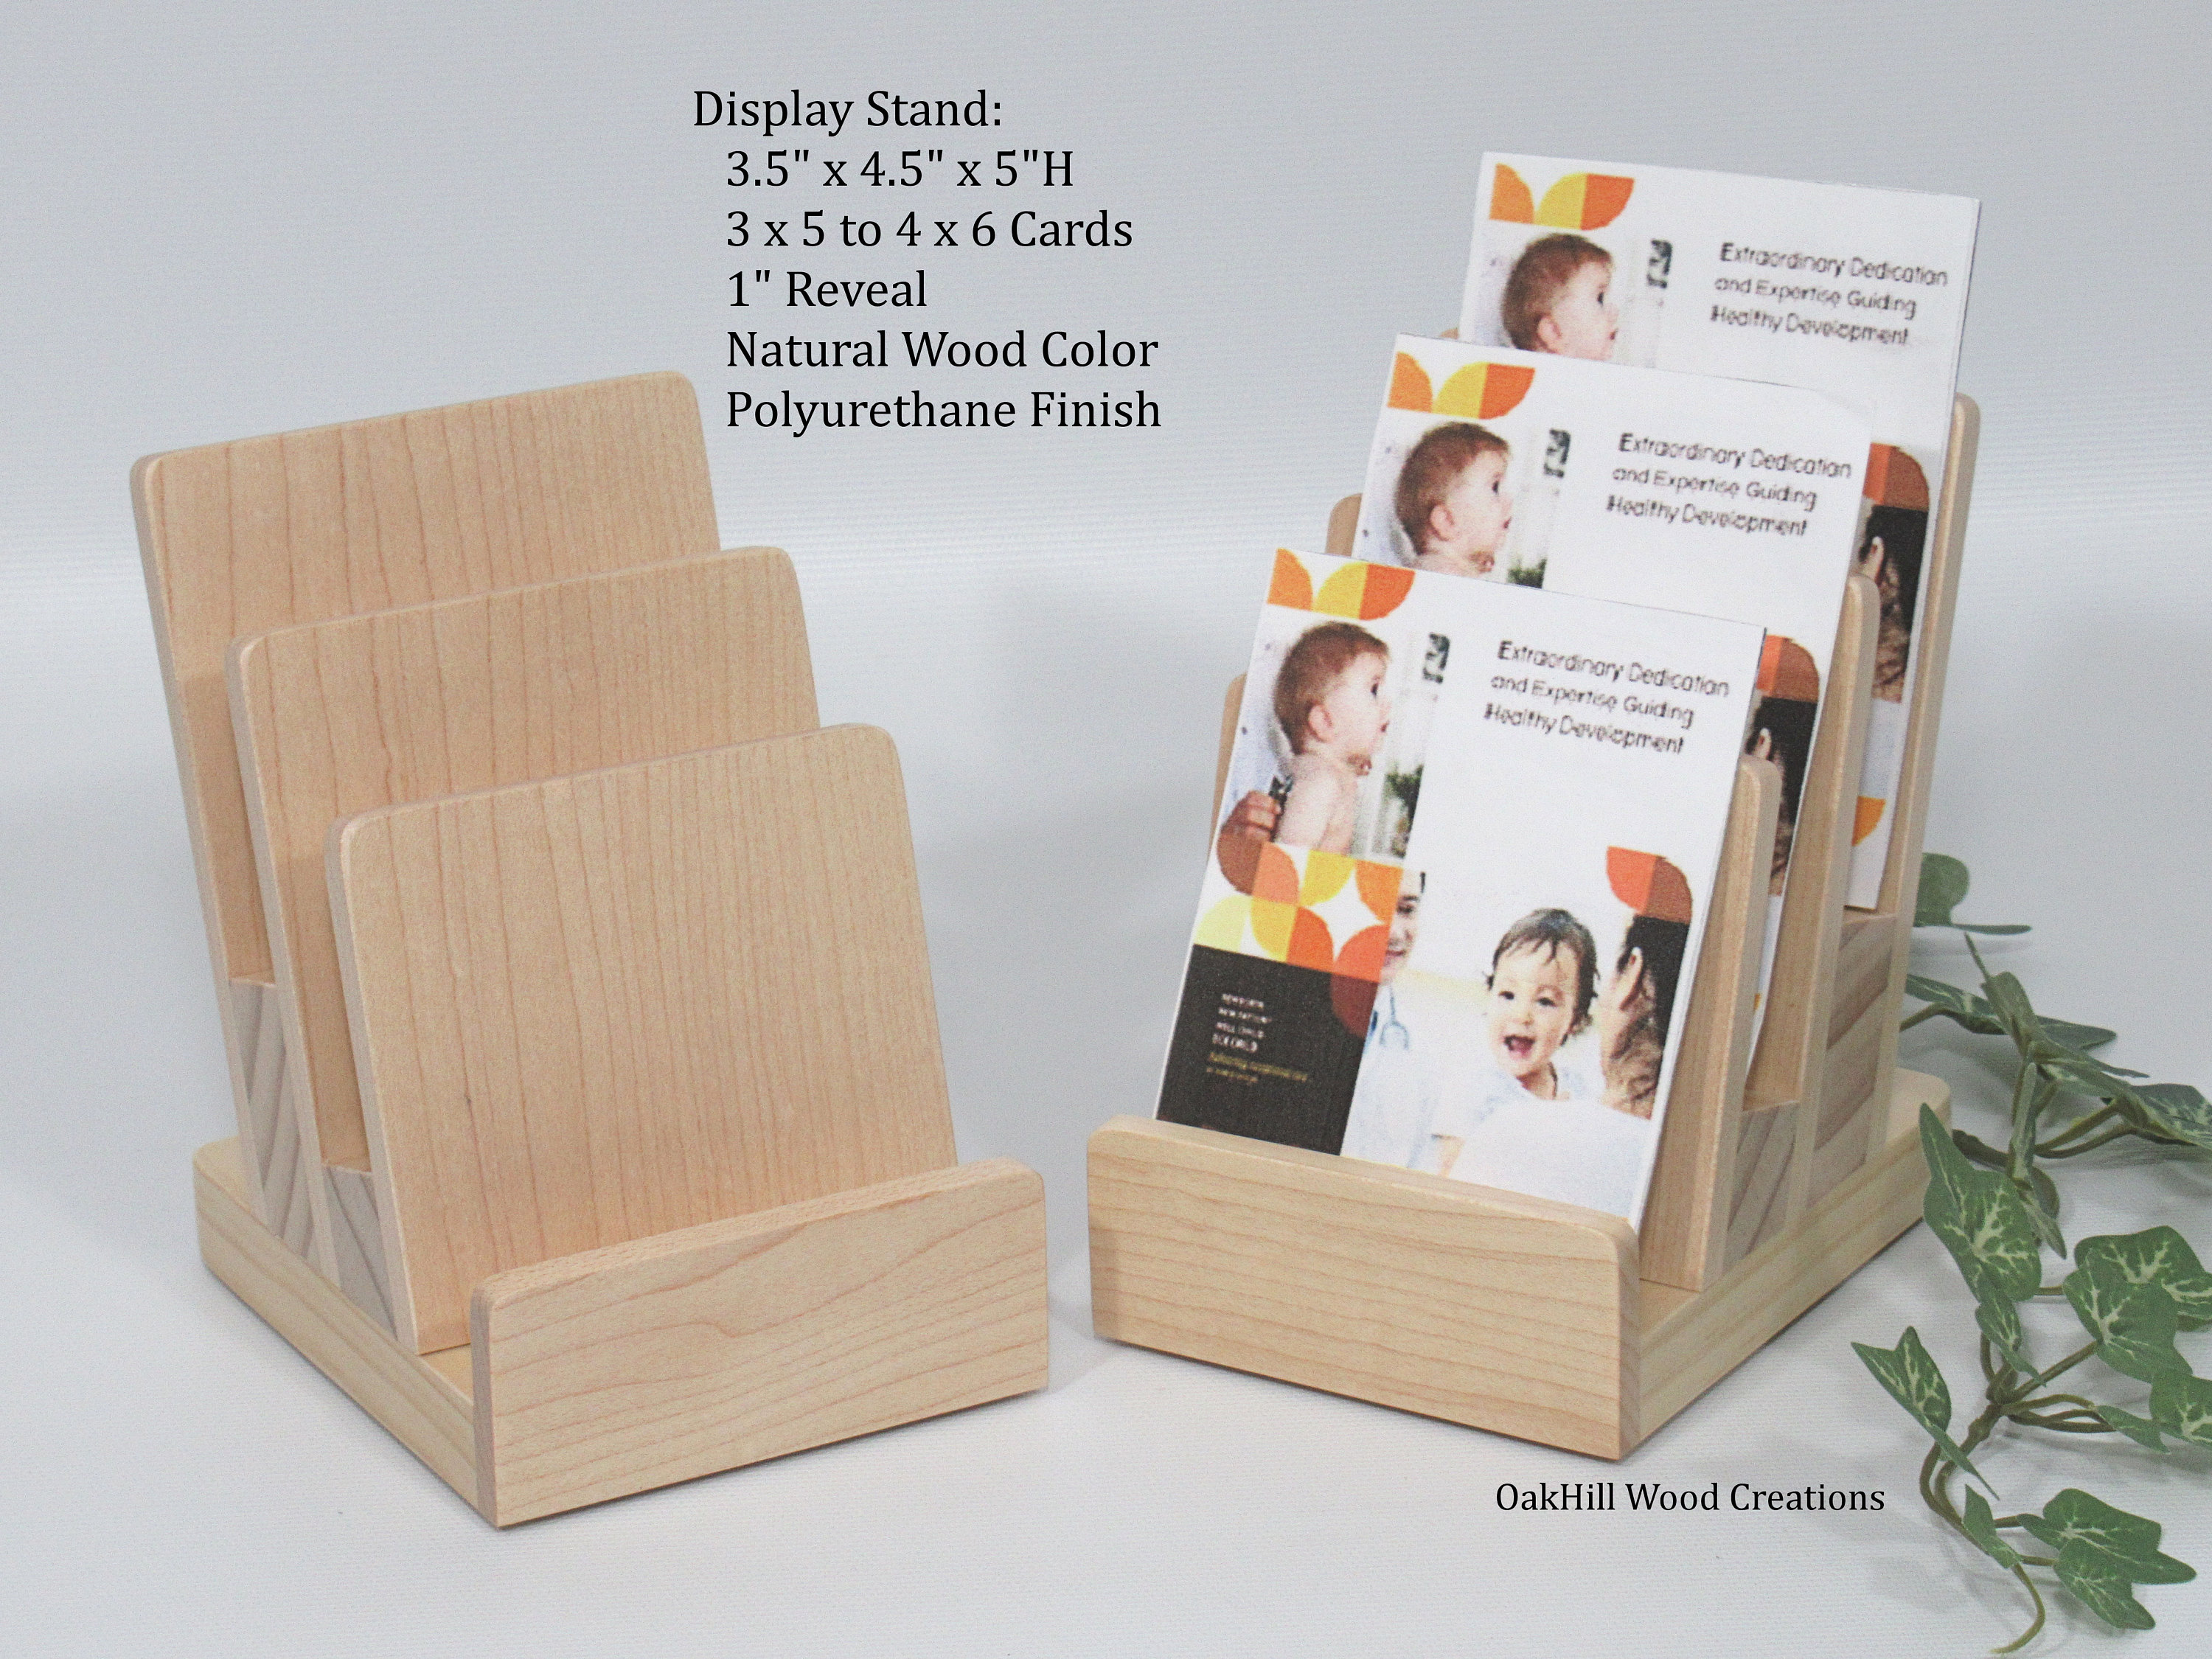 DS The Display Store 3 Tier Rotating Sticker Display Stand for Vendors Brown Wooden Gift Card Display Stand Countertop Retail Display Sticker Holder